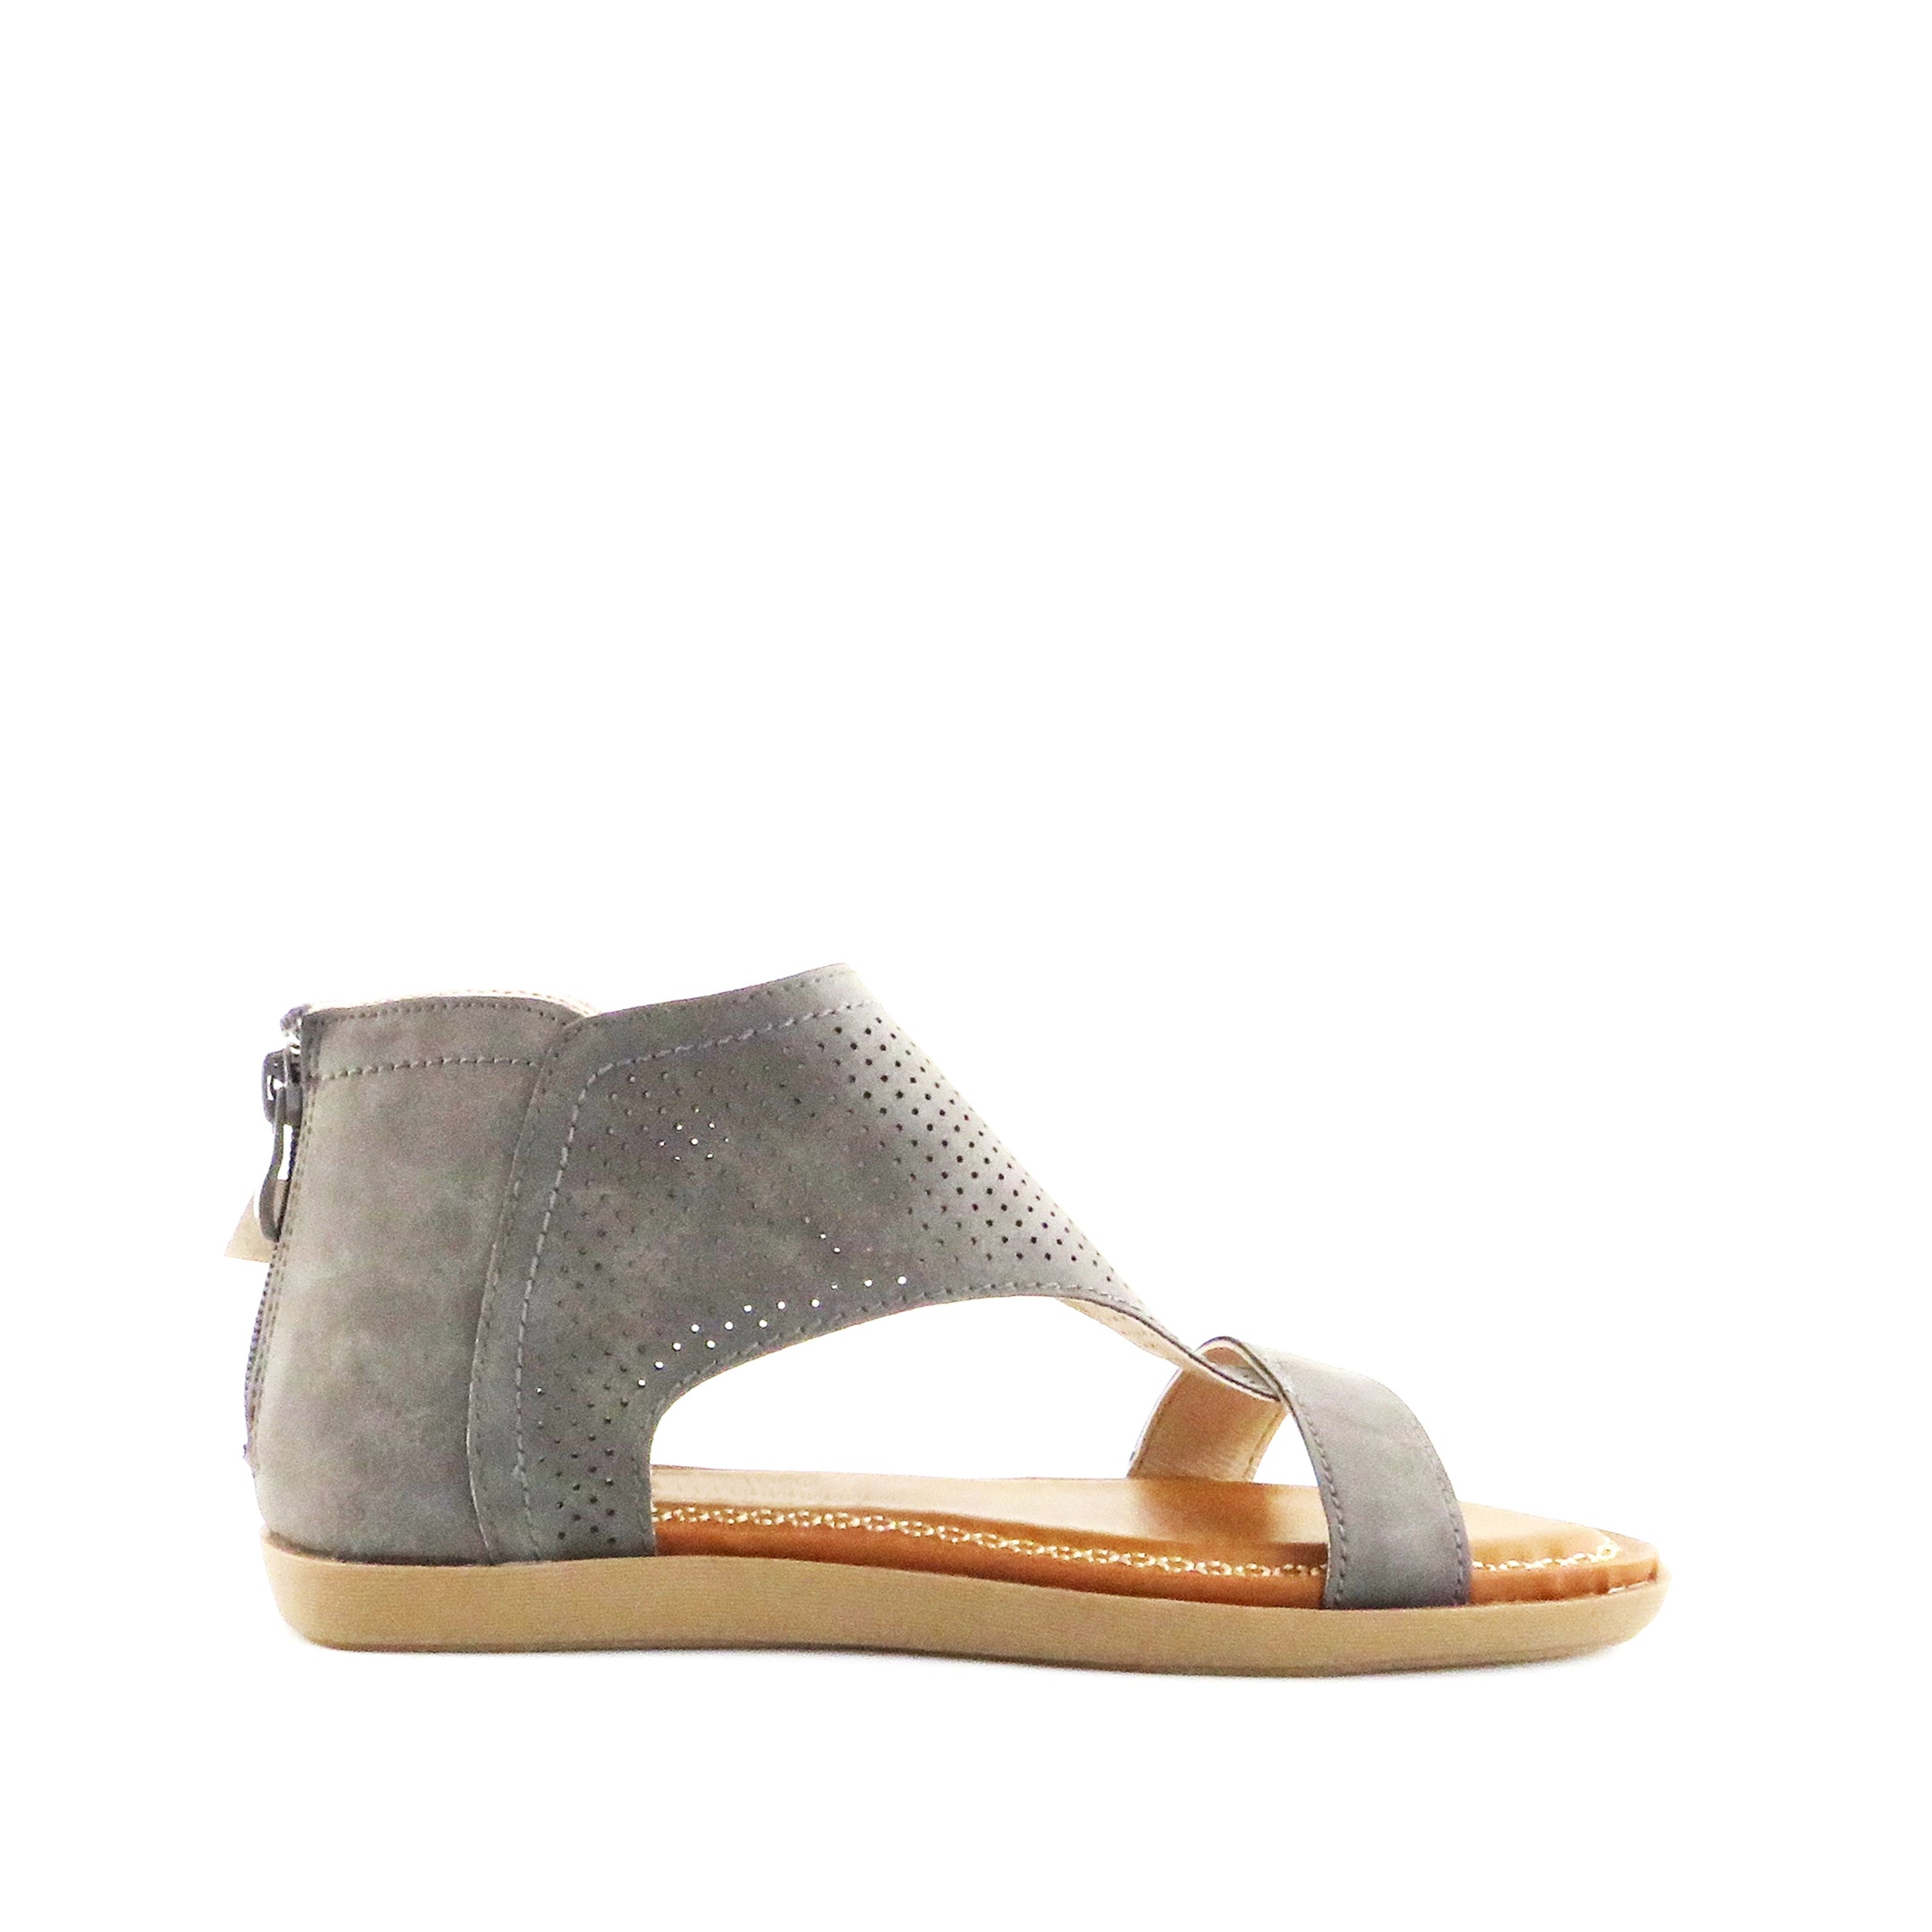 Buy Women's Coop Slate Perforated Sandal by Nest Shoes